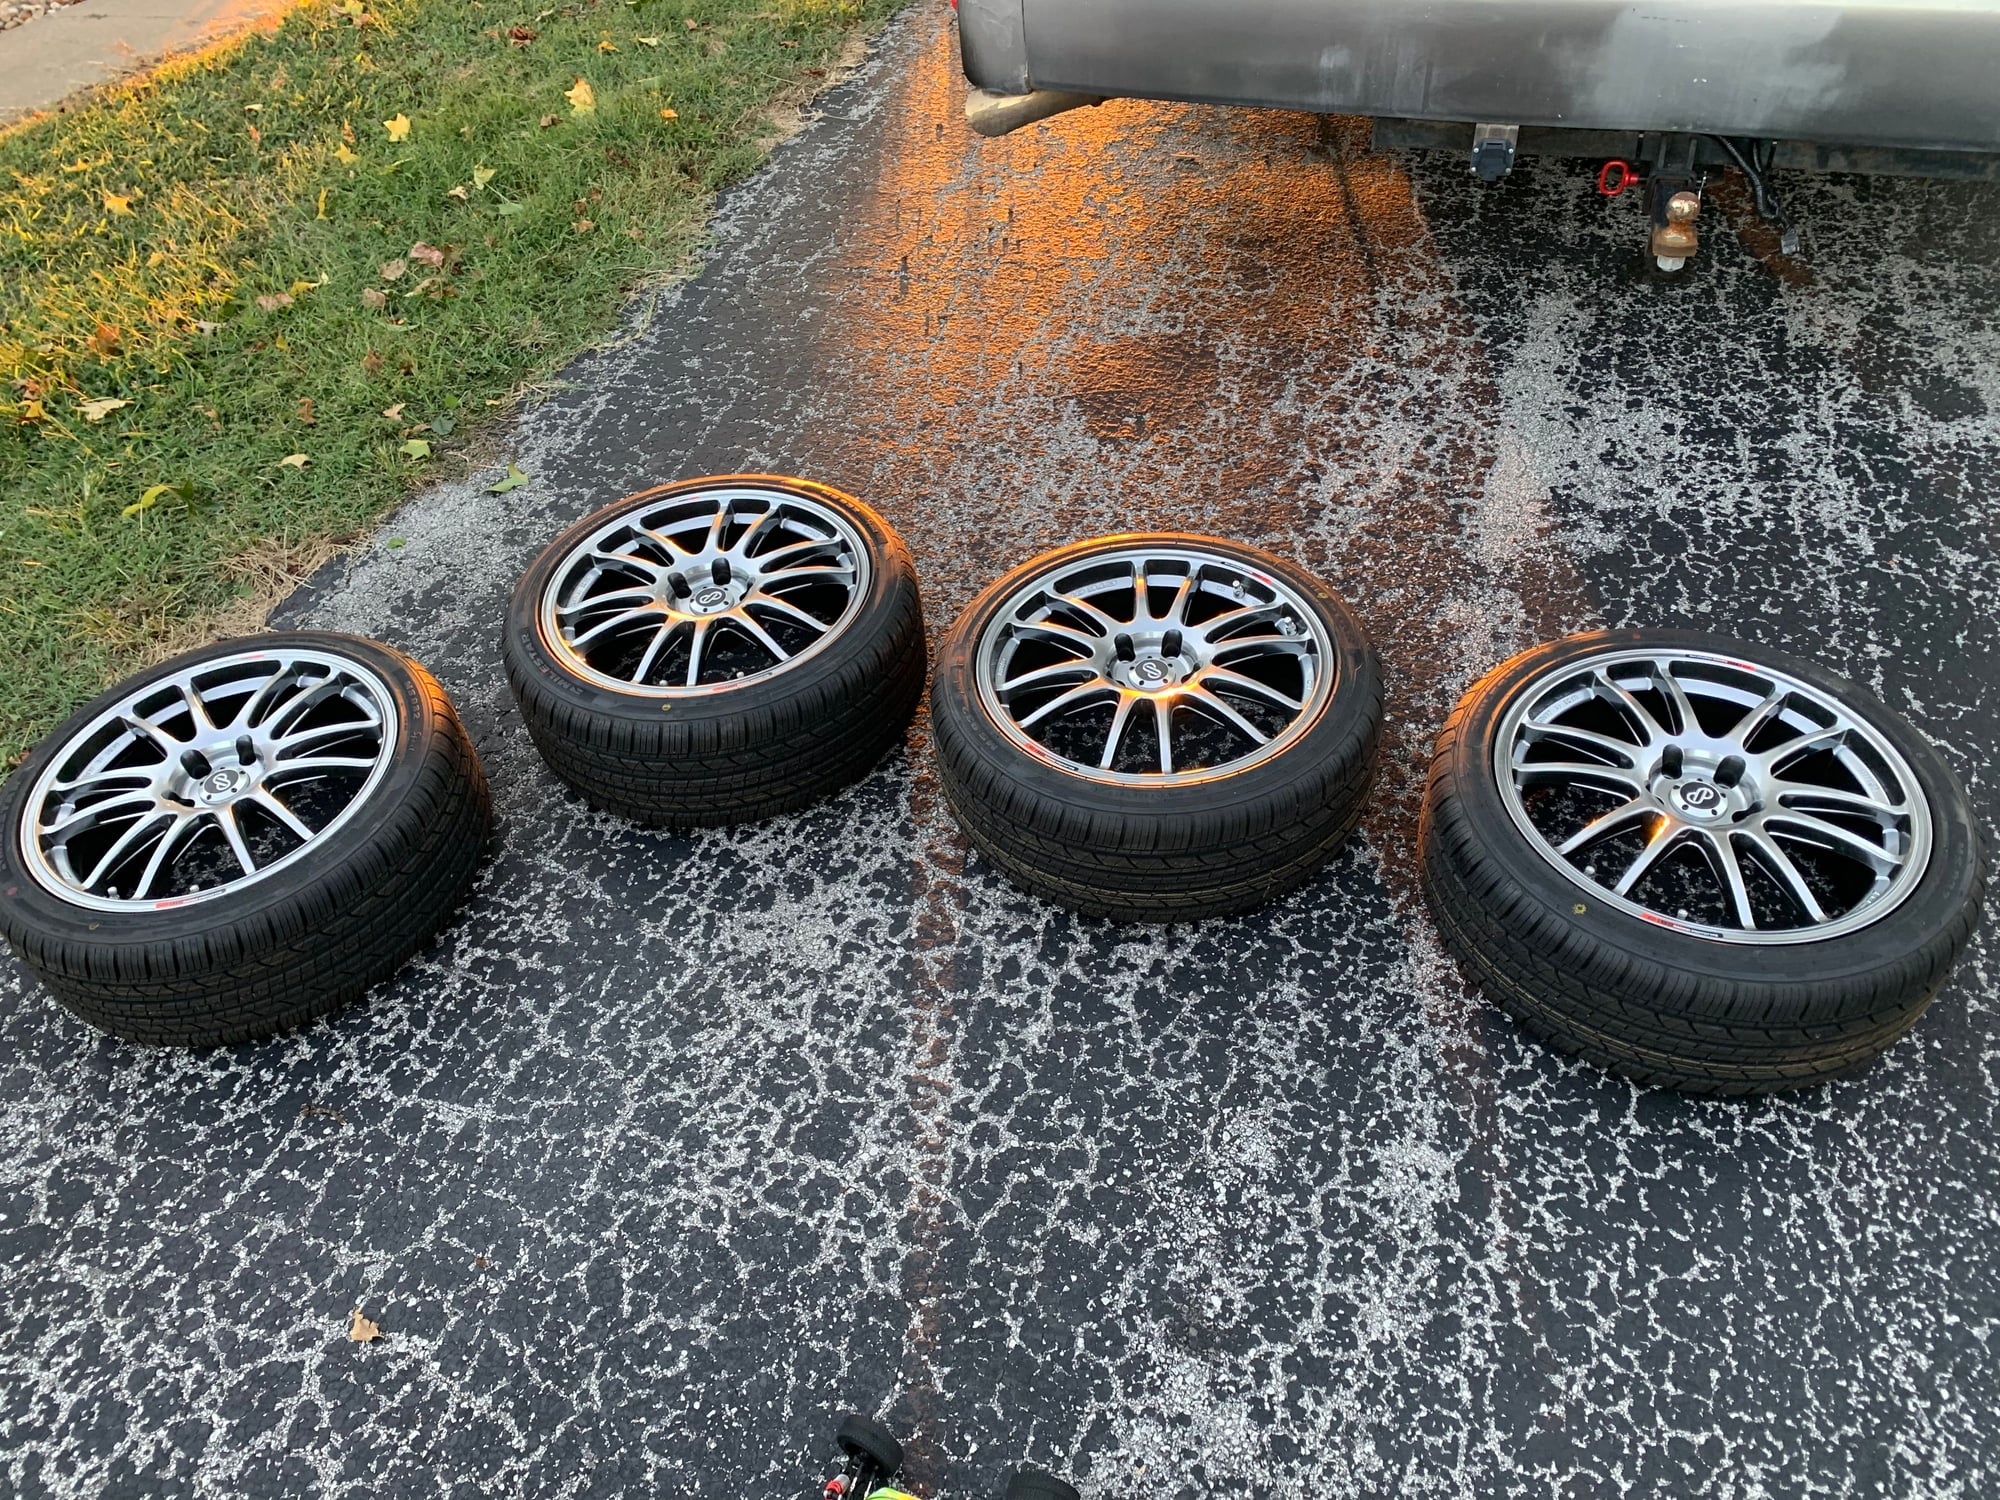 Wheels and Tires/Axles - Enkei GTC01 wheels with 225/40-18 tires NEW - New - 1986 to 1995 Mazda RX-7 - Seneca, MO 64865, United States